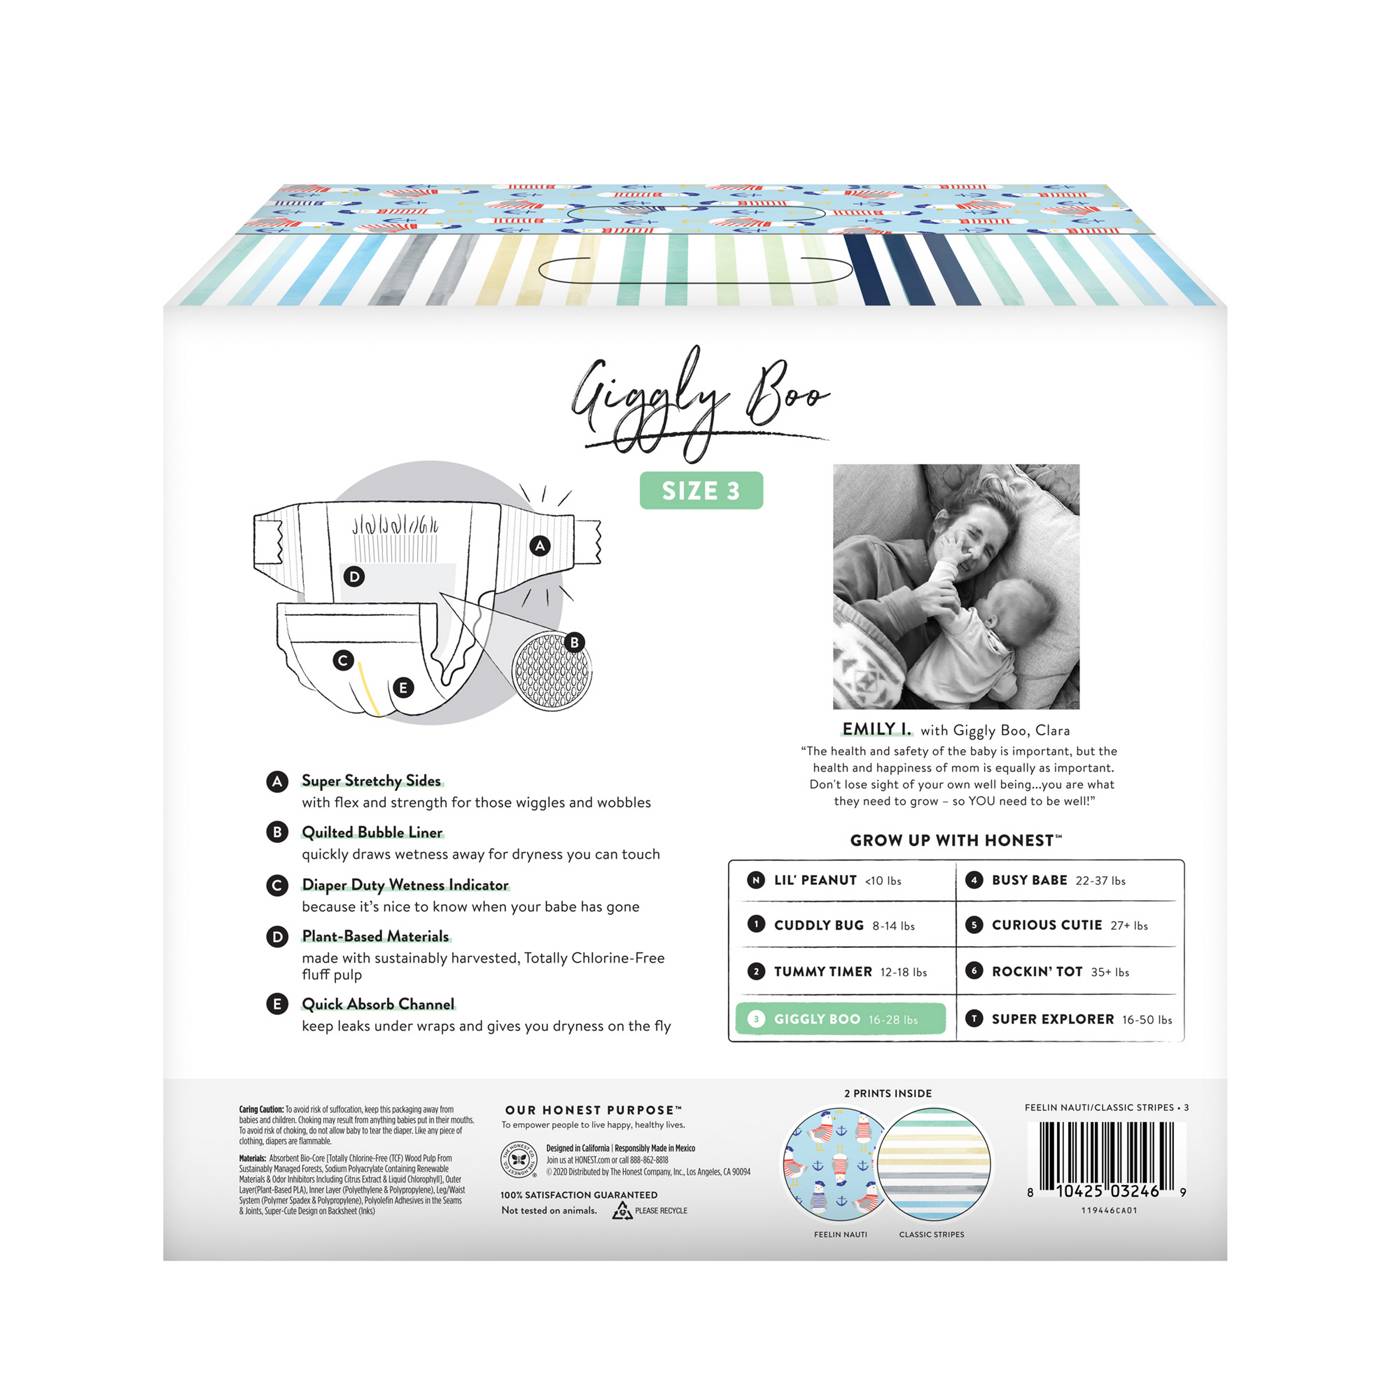 The Honest Company Clean Conscious Diapers Club Box - Size 3, 2 Print Pack; image 5 of 9